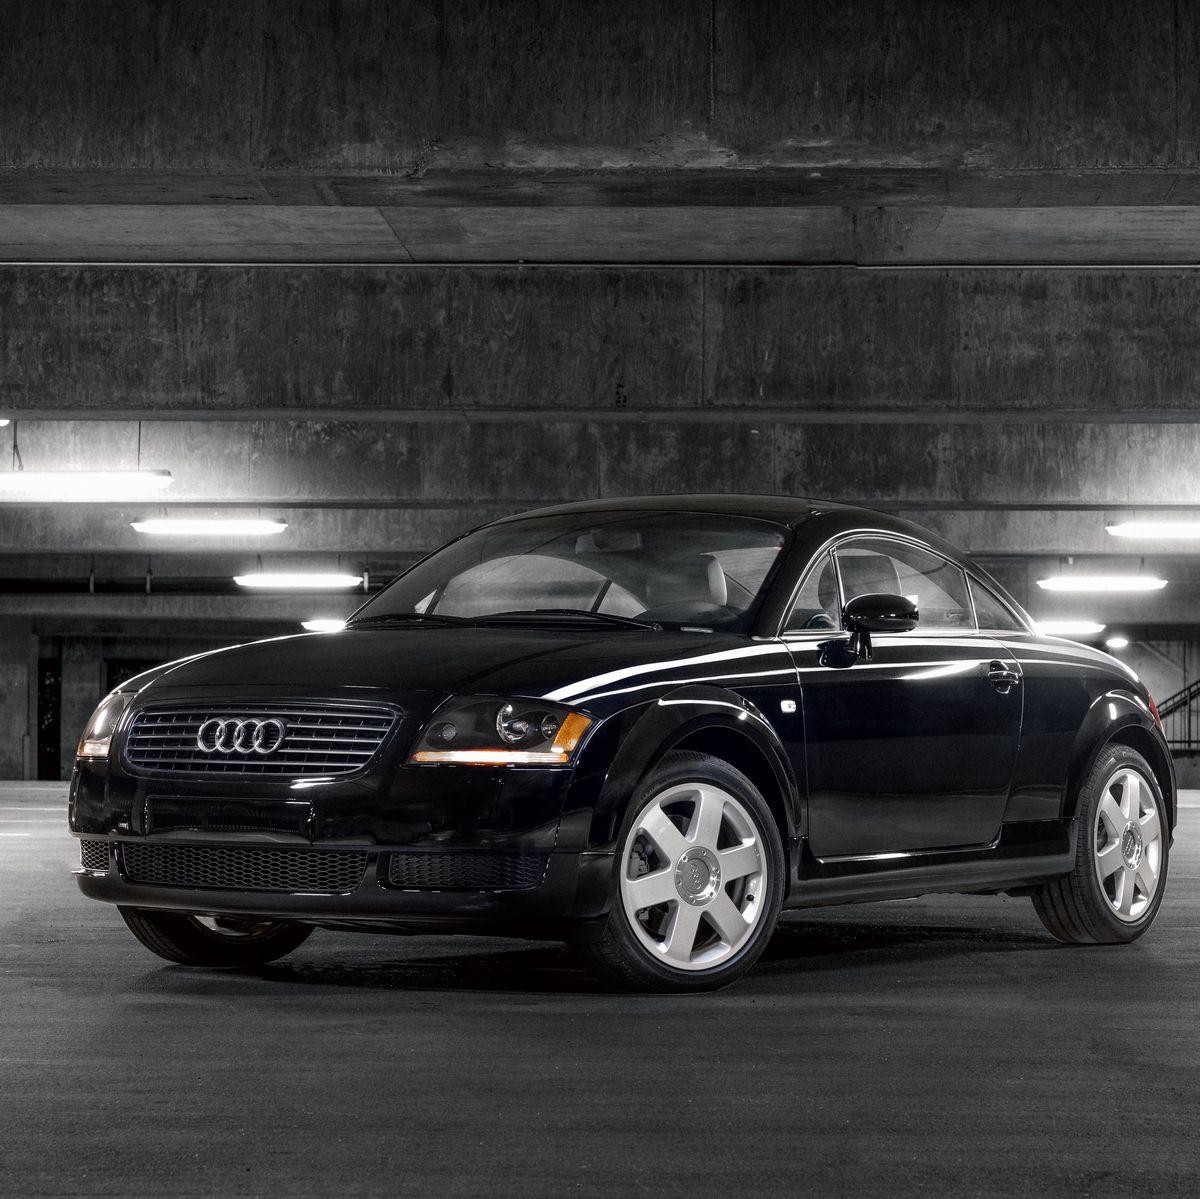 The Audi TT's Death Marks the End of an Era in More Ways Than One